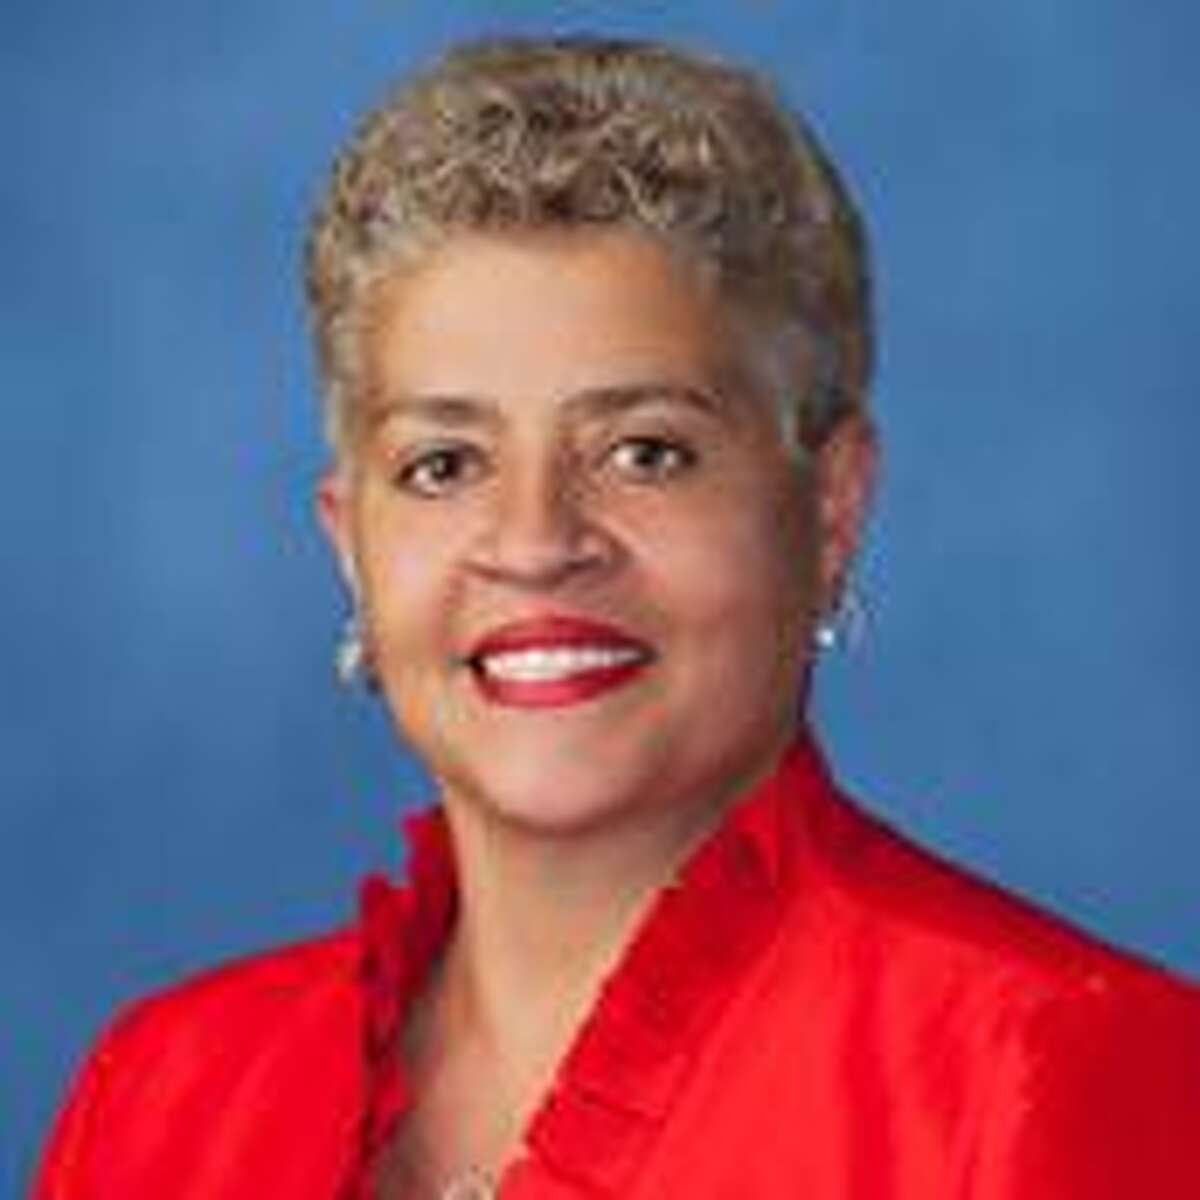 Carolyn Evans-Shabazz is an incumbent candidate for Houston Community CollegeÂ?’s board of trustees.